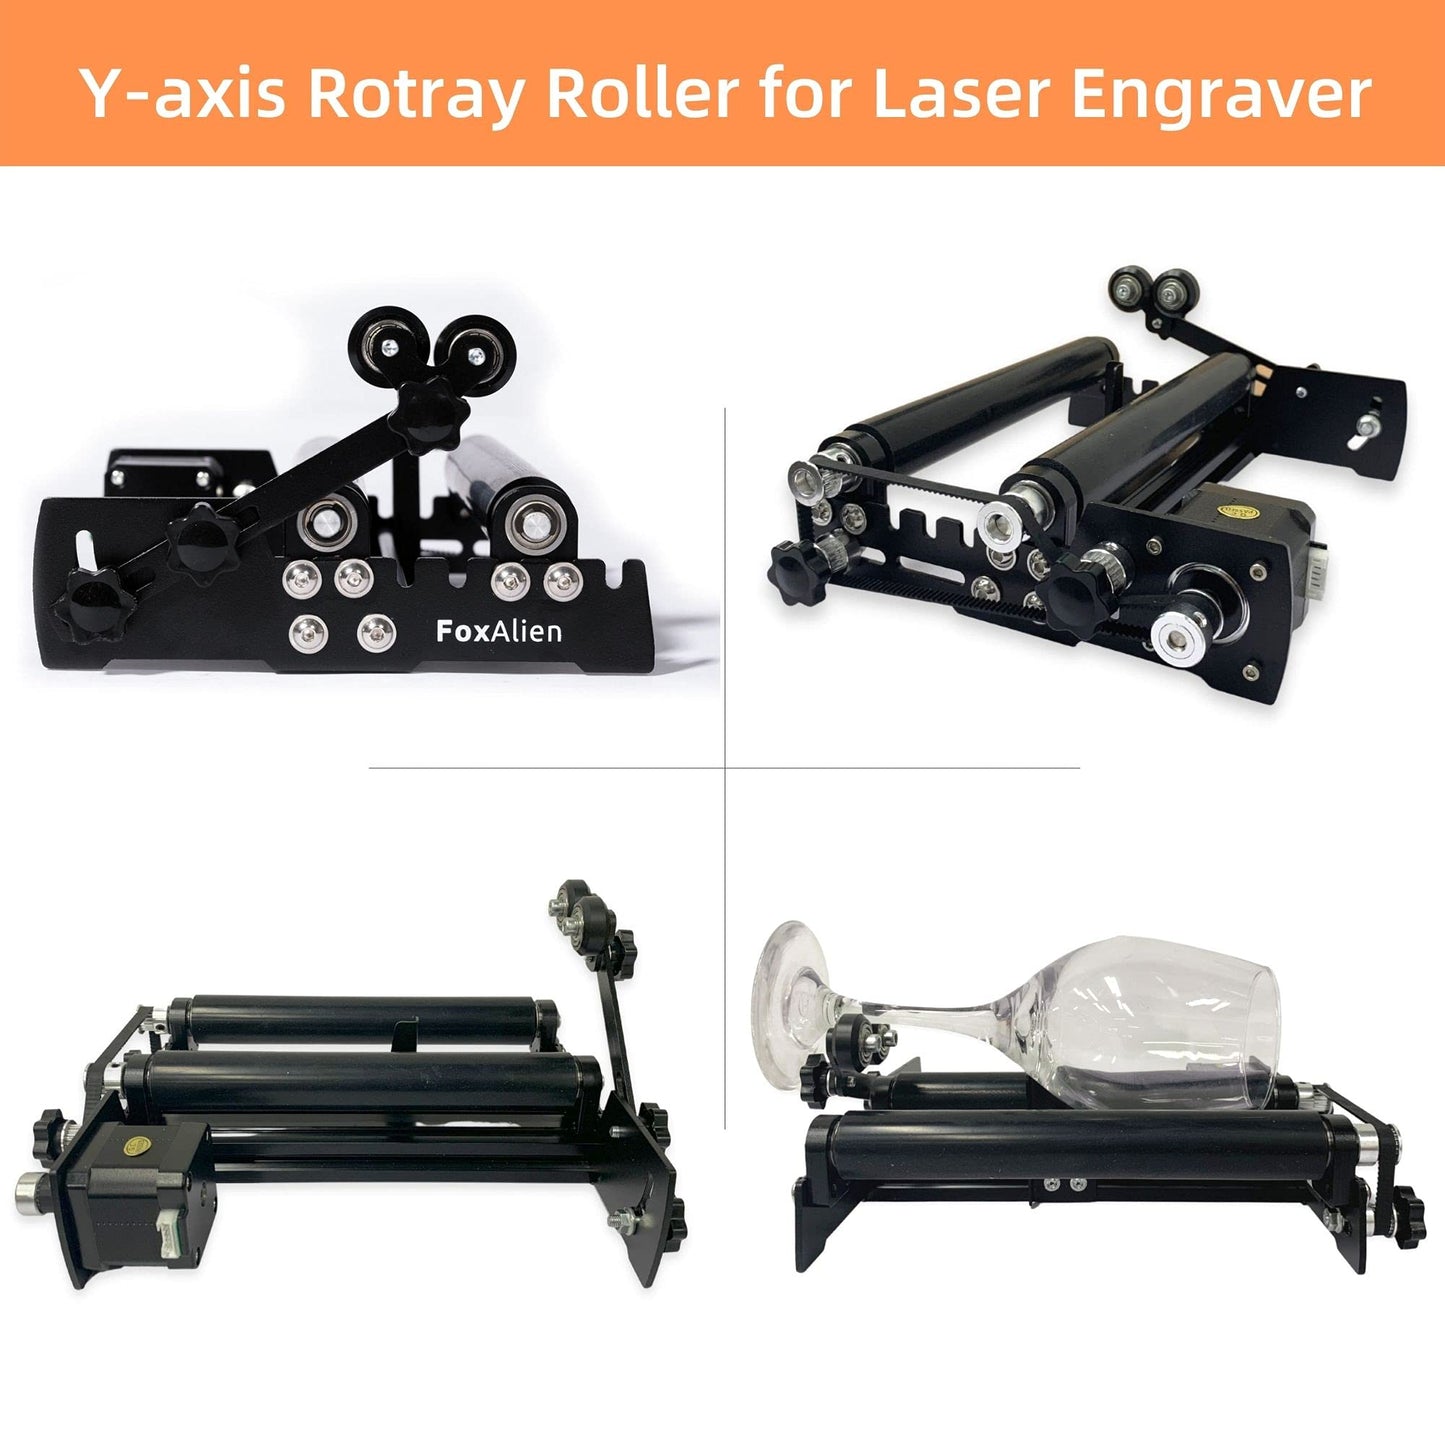 FoxAlien R42 Y-axis Rotary Roller Engraving Module for Cylindrical Objects Curved Surface Compatible with FoxAlien Masuter Pro, Masuter 4040 CNC